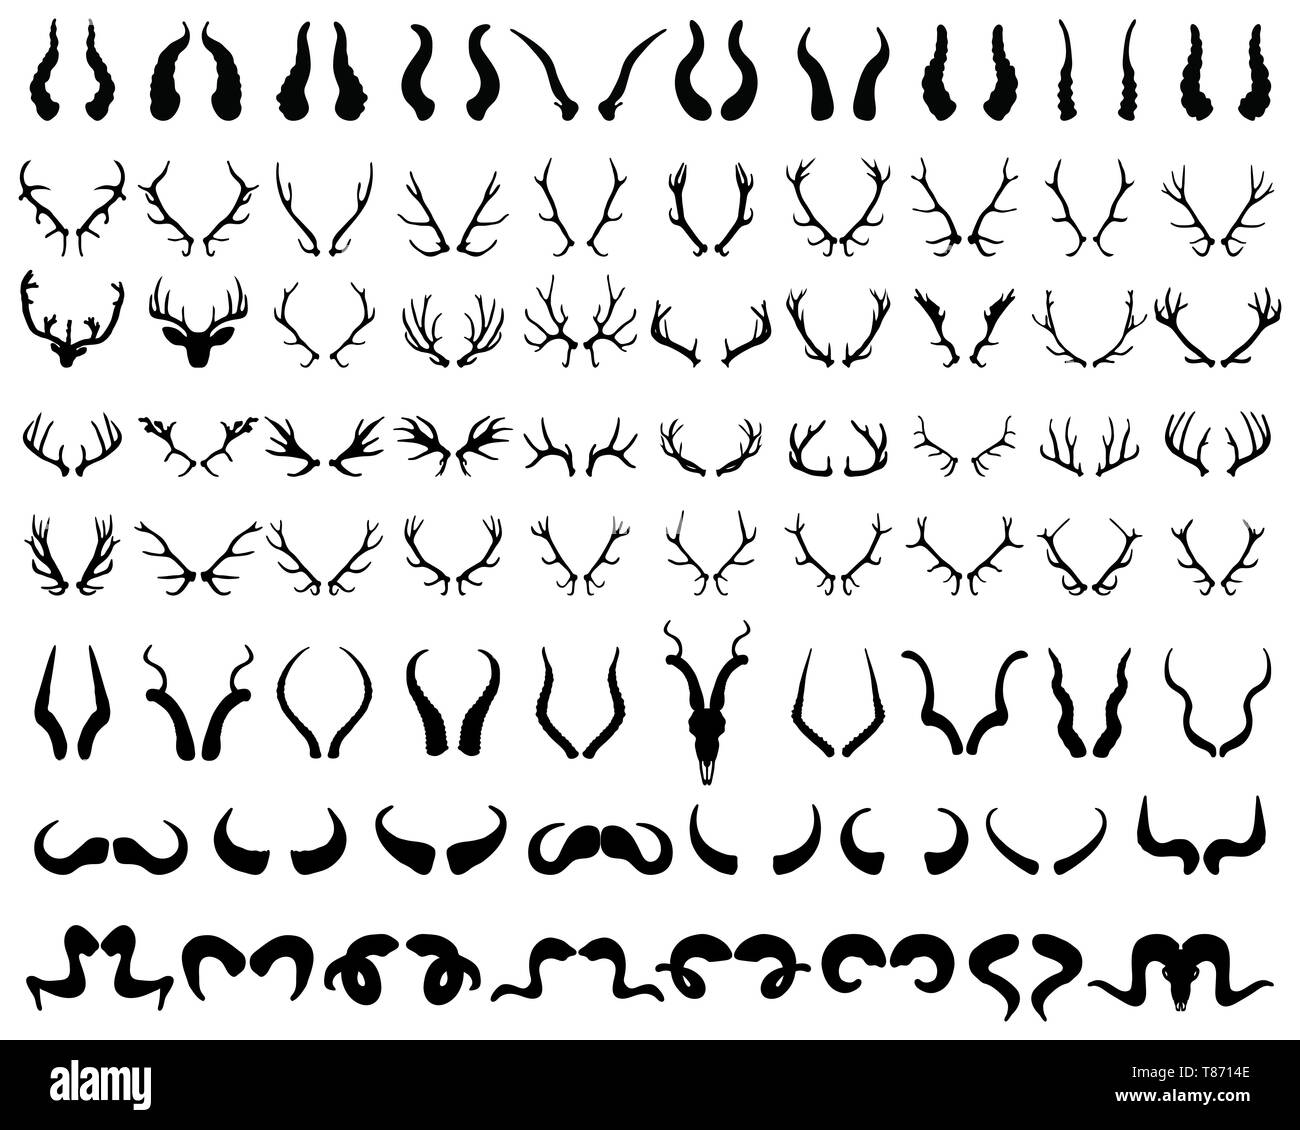 Set of black silhouettes of different horns on a white background Stock Photo